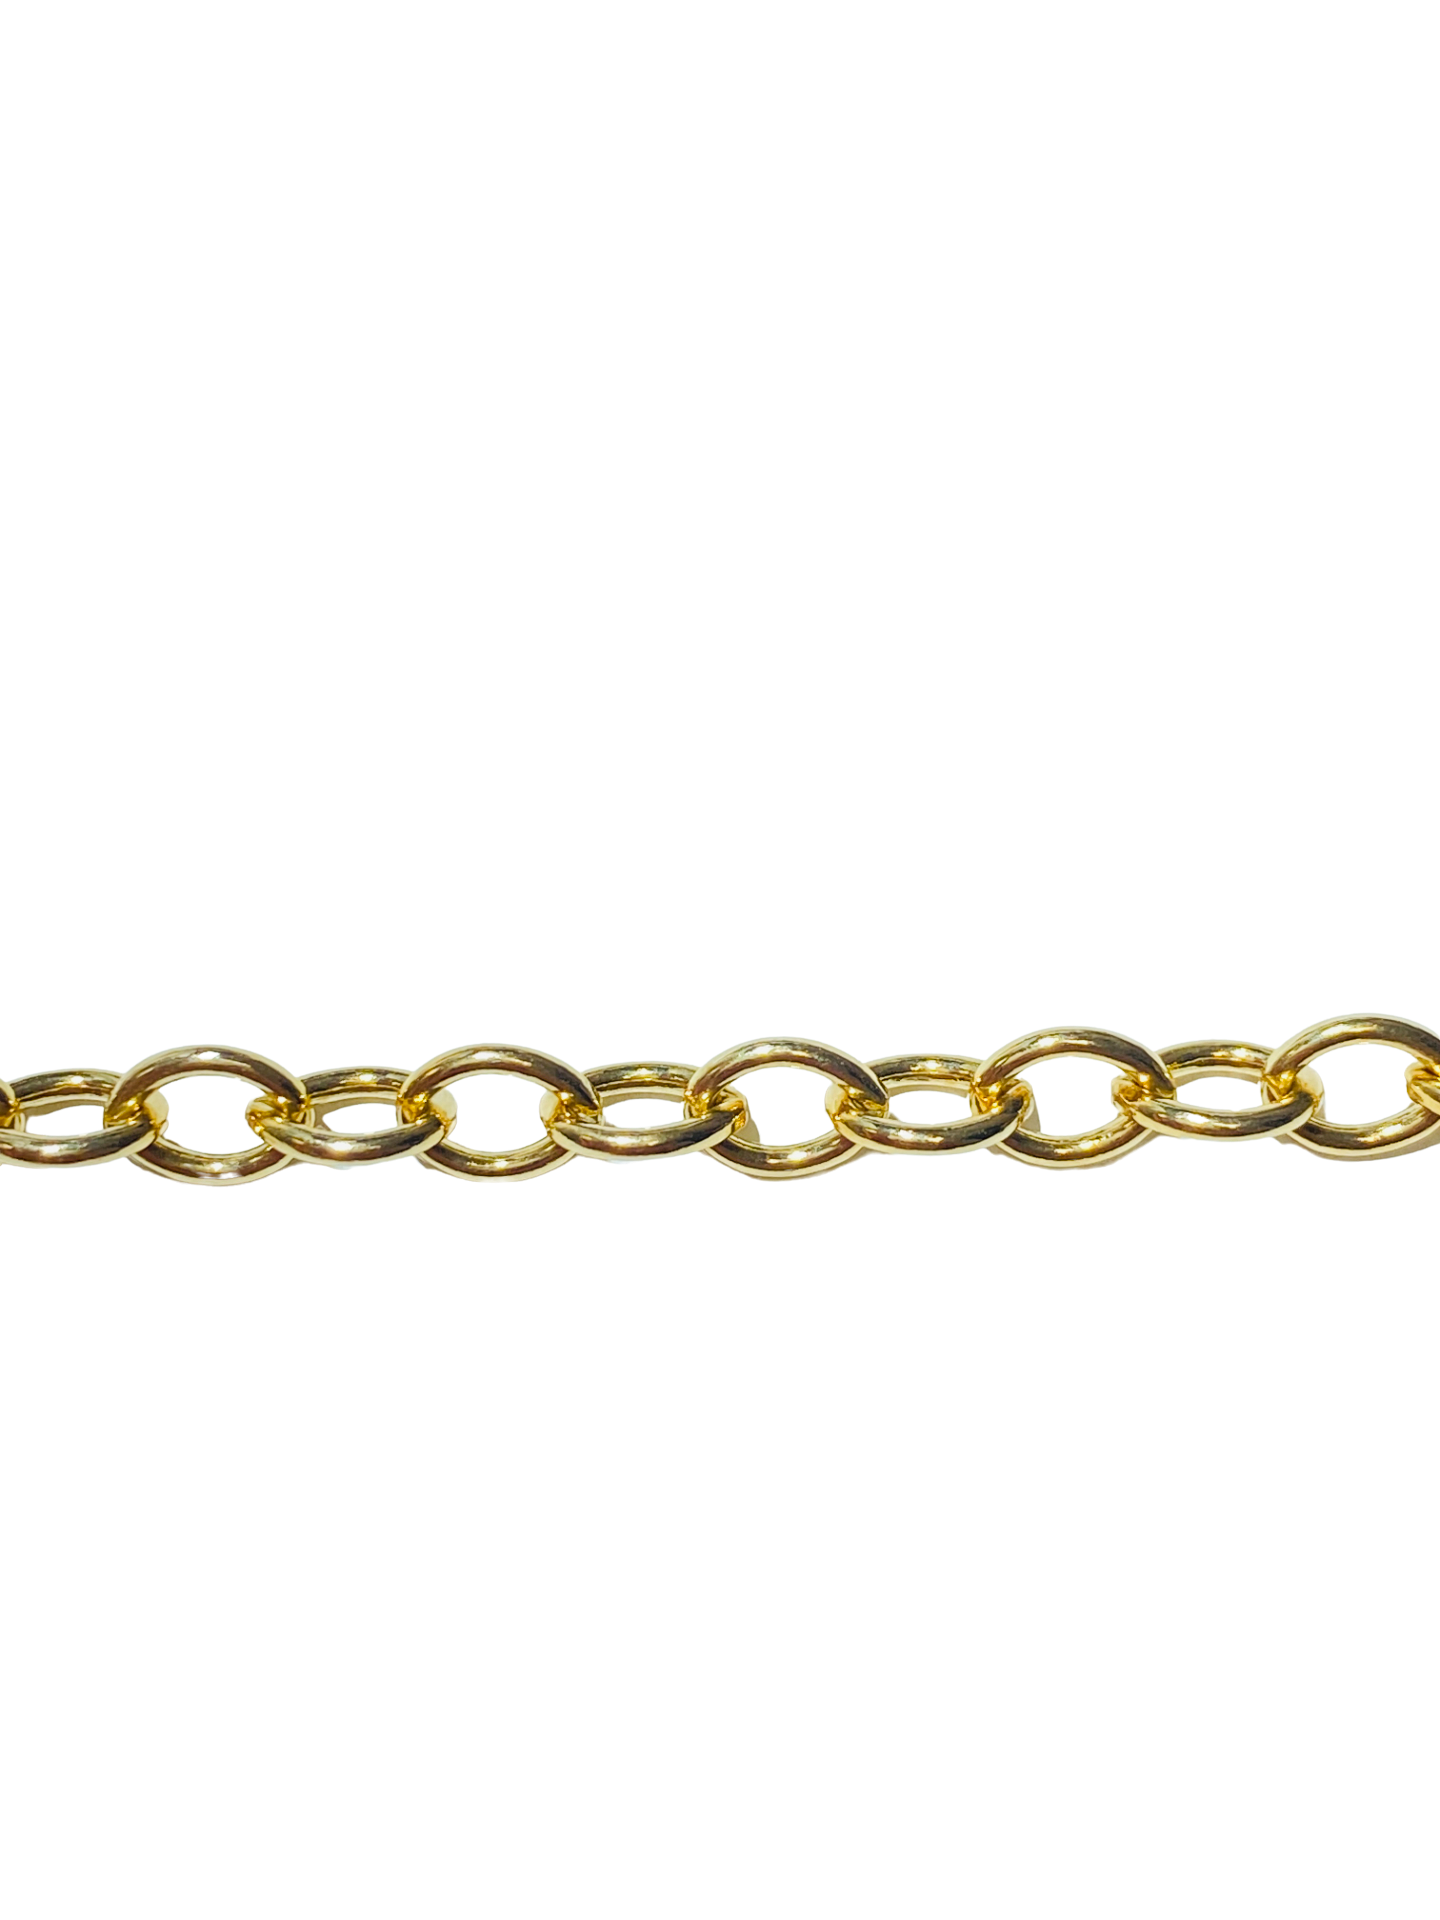 4804 14kt Gold Filled Chain